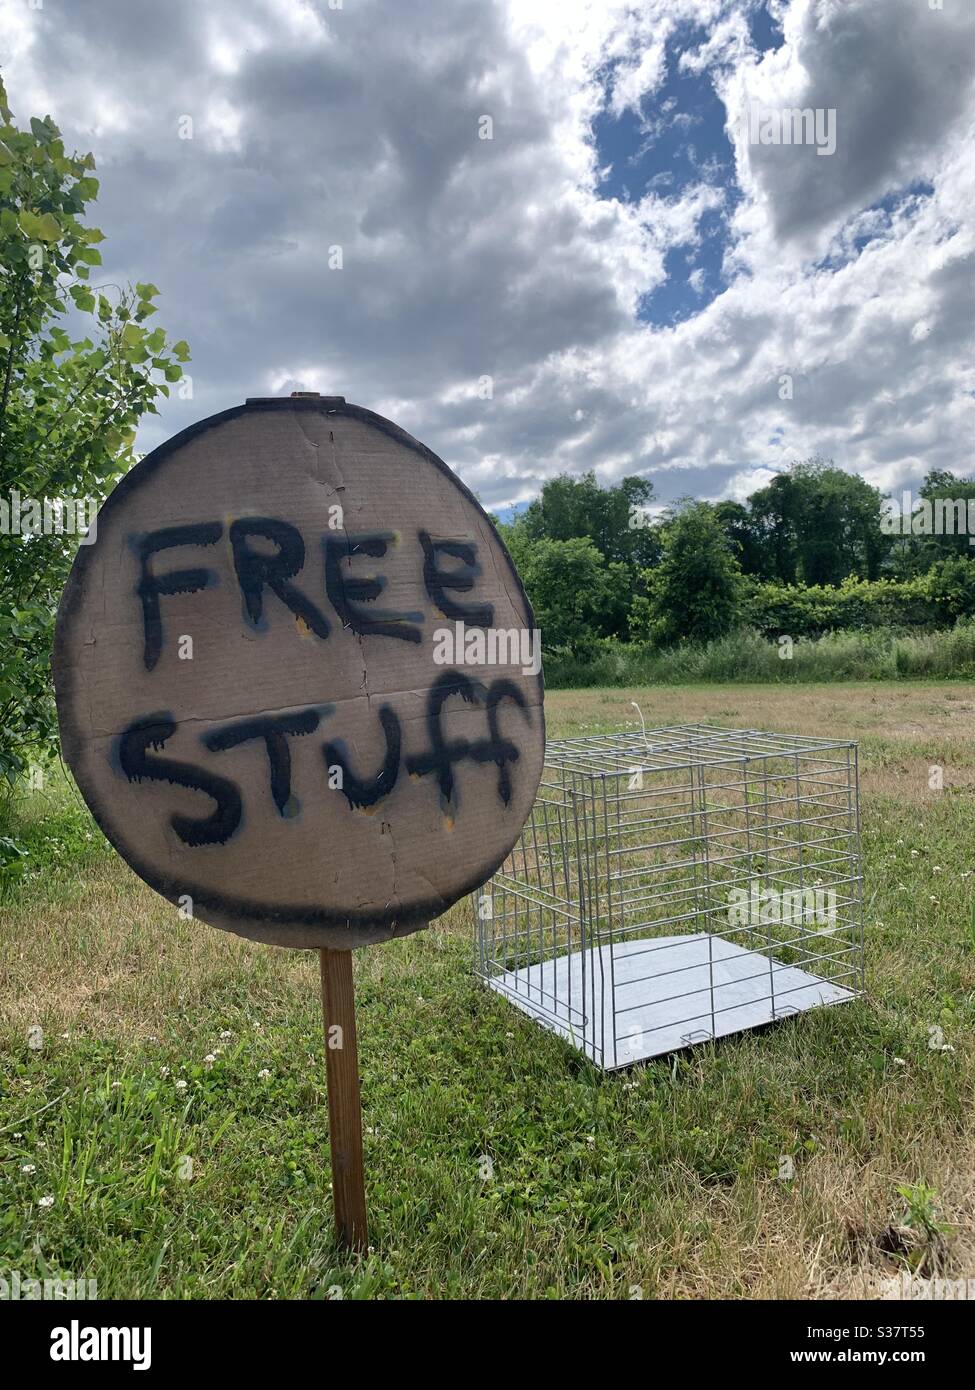 Free stuff, people dump unwanted items on there lawn for others to find as treasures  the round sign seems like a nice design choice Stock Photo